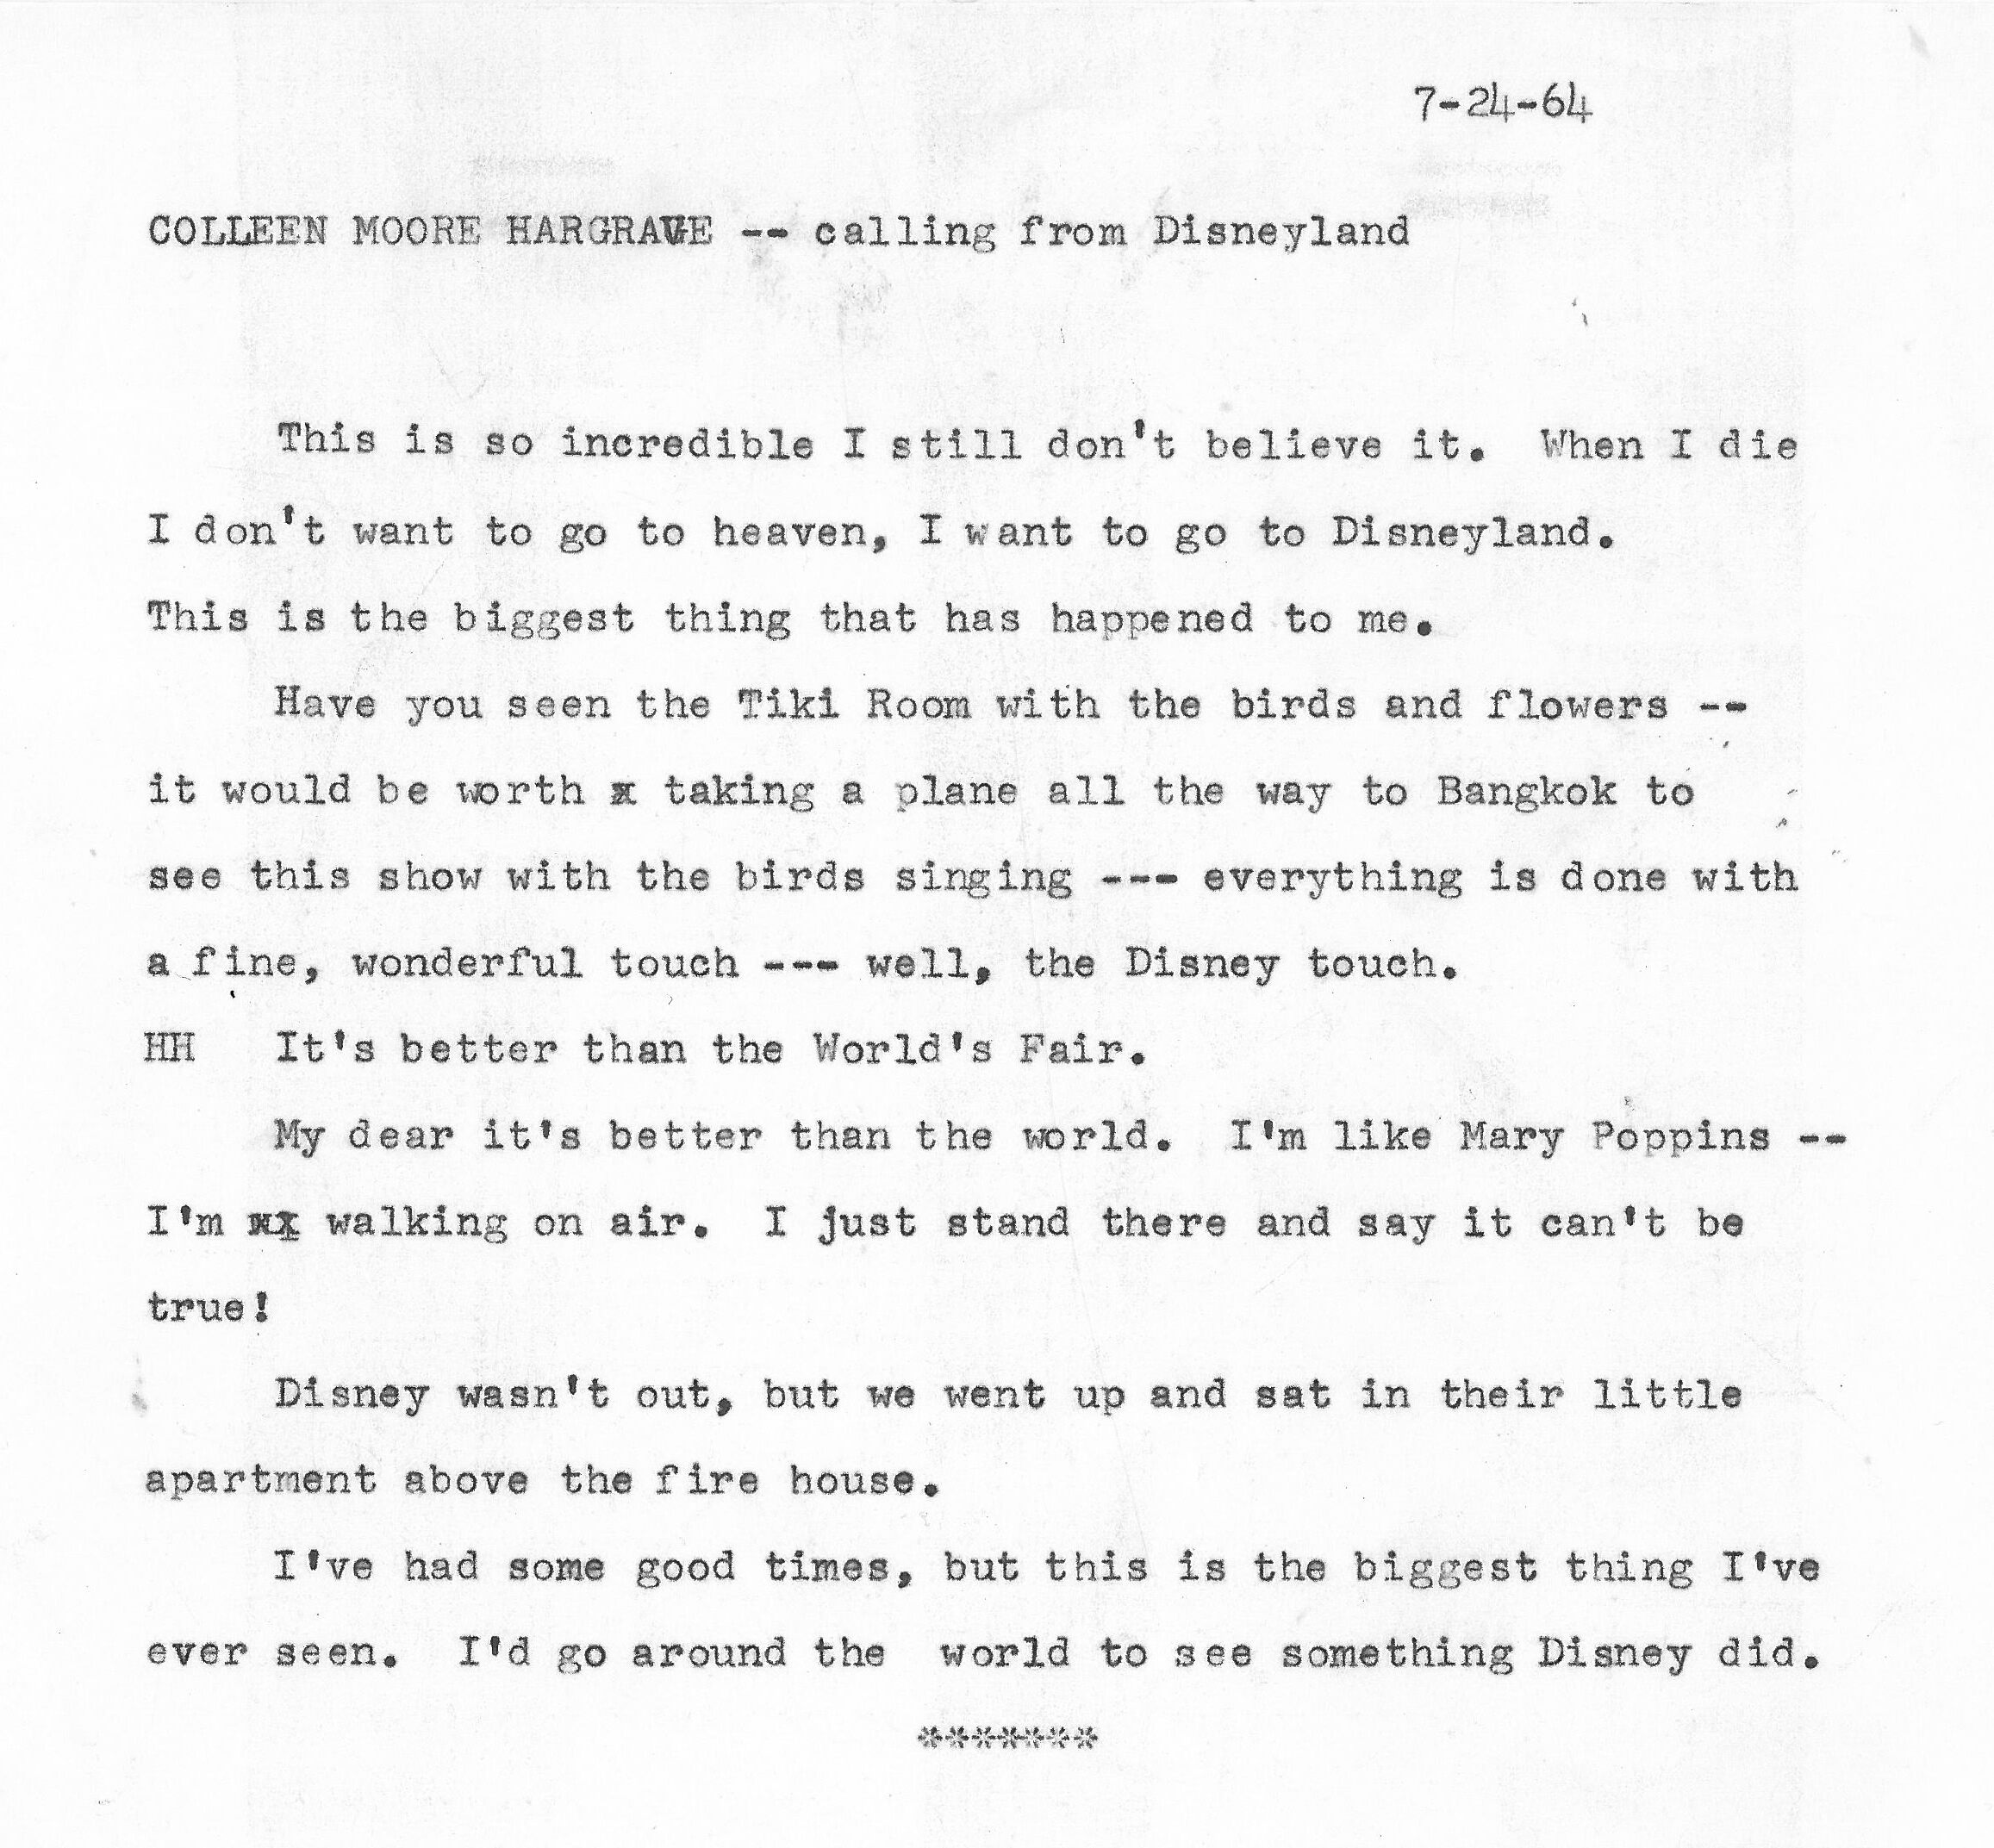 Colleen Moore's letter